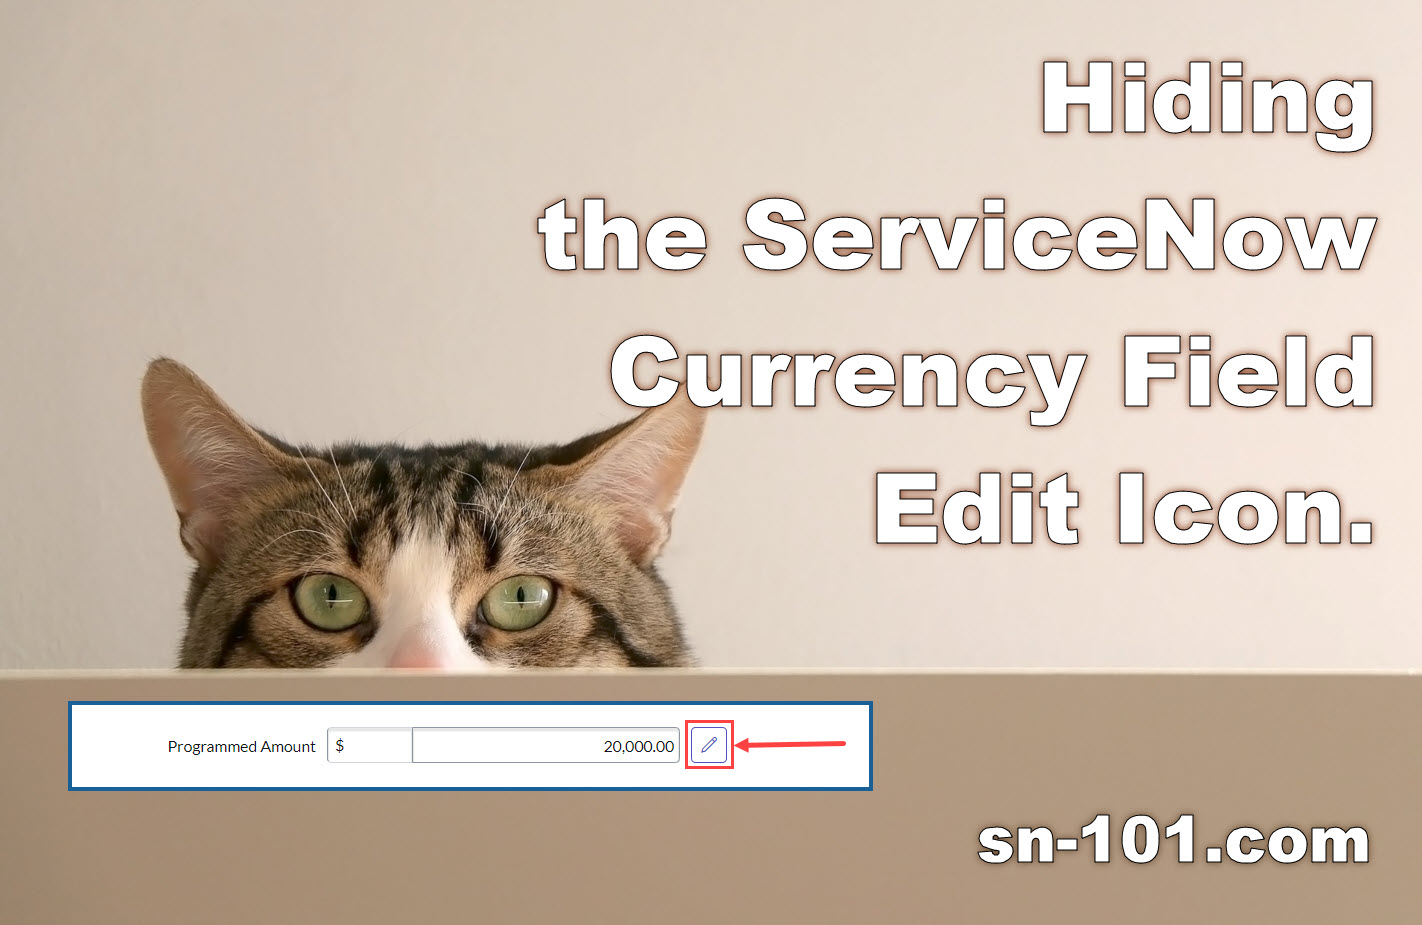 Hiding the ServiceNow Currency Field Edit Icon